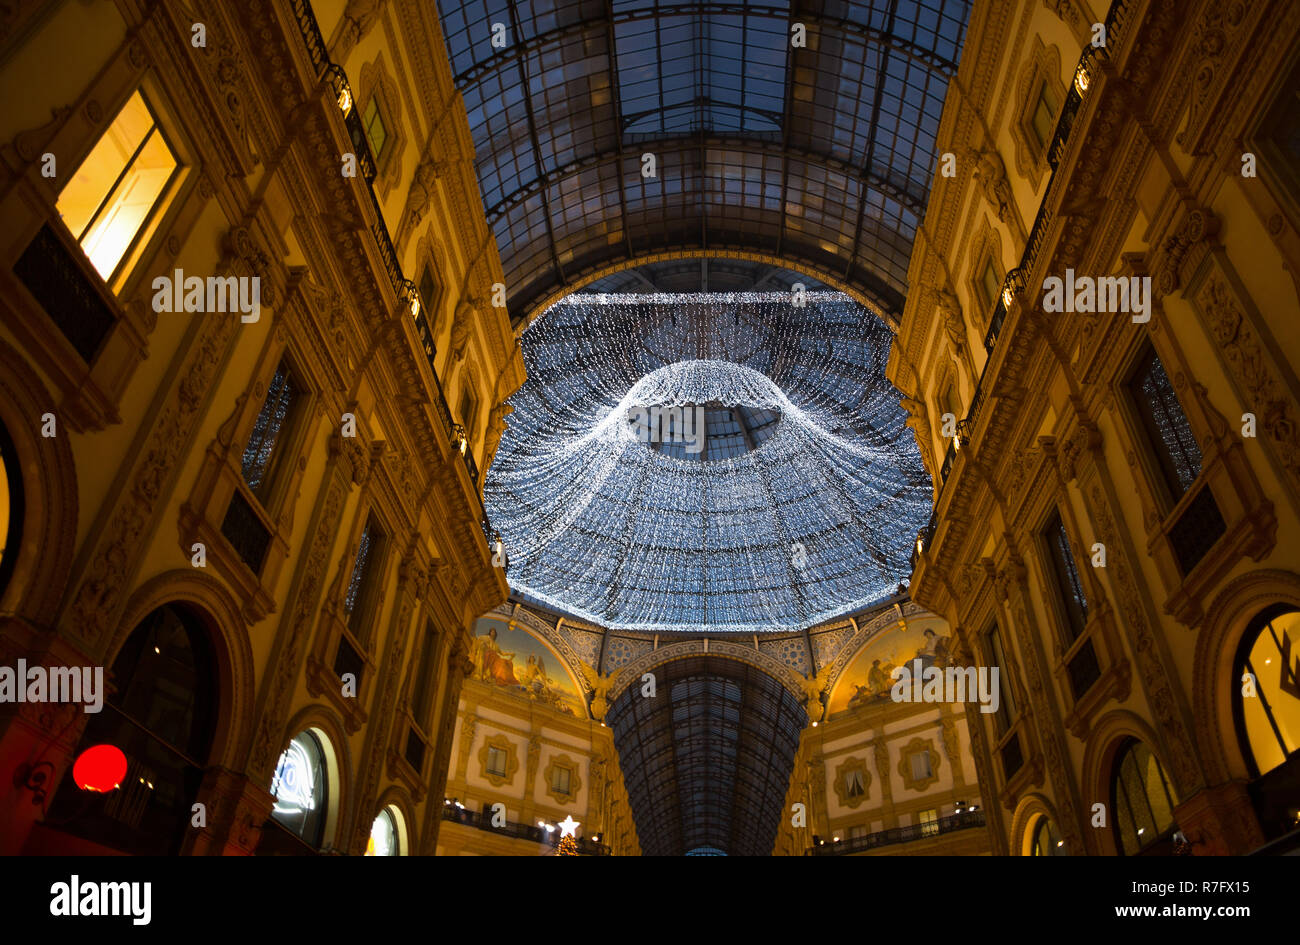 The Golden Glow of Lights in the Galleria Vittorio Emanuele II at